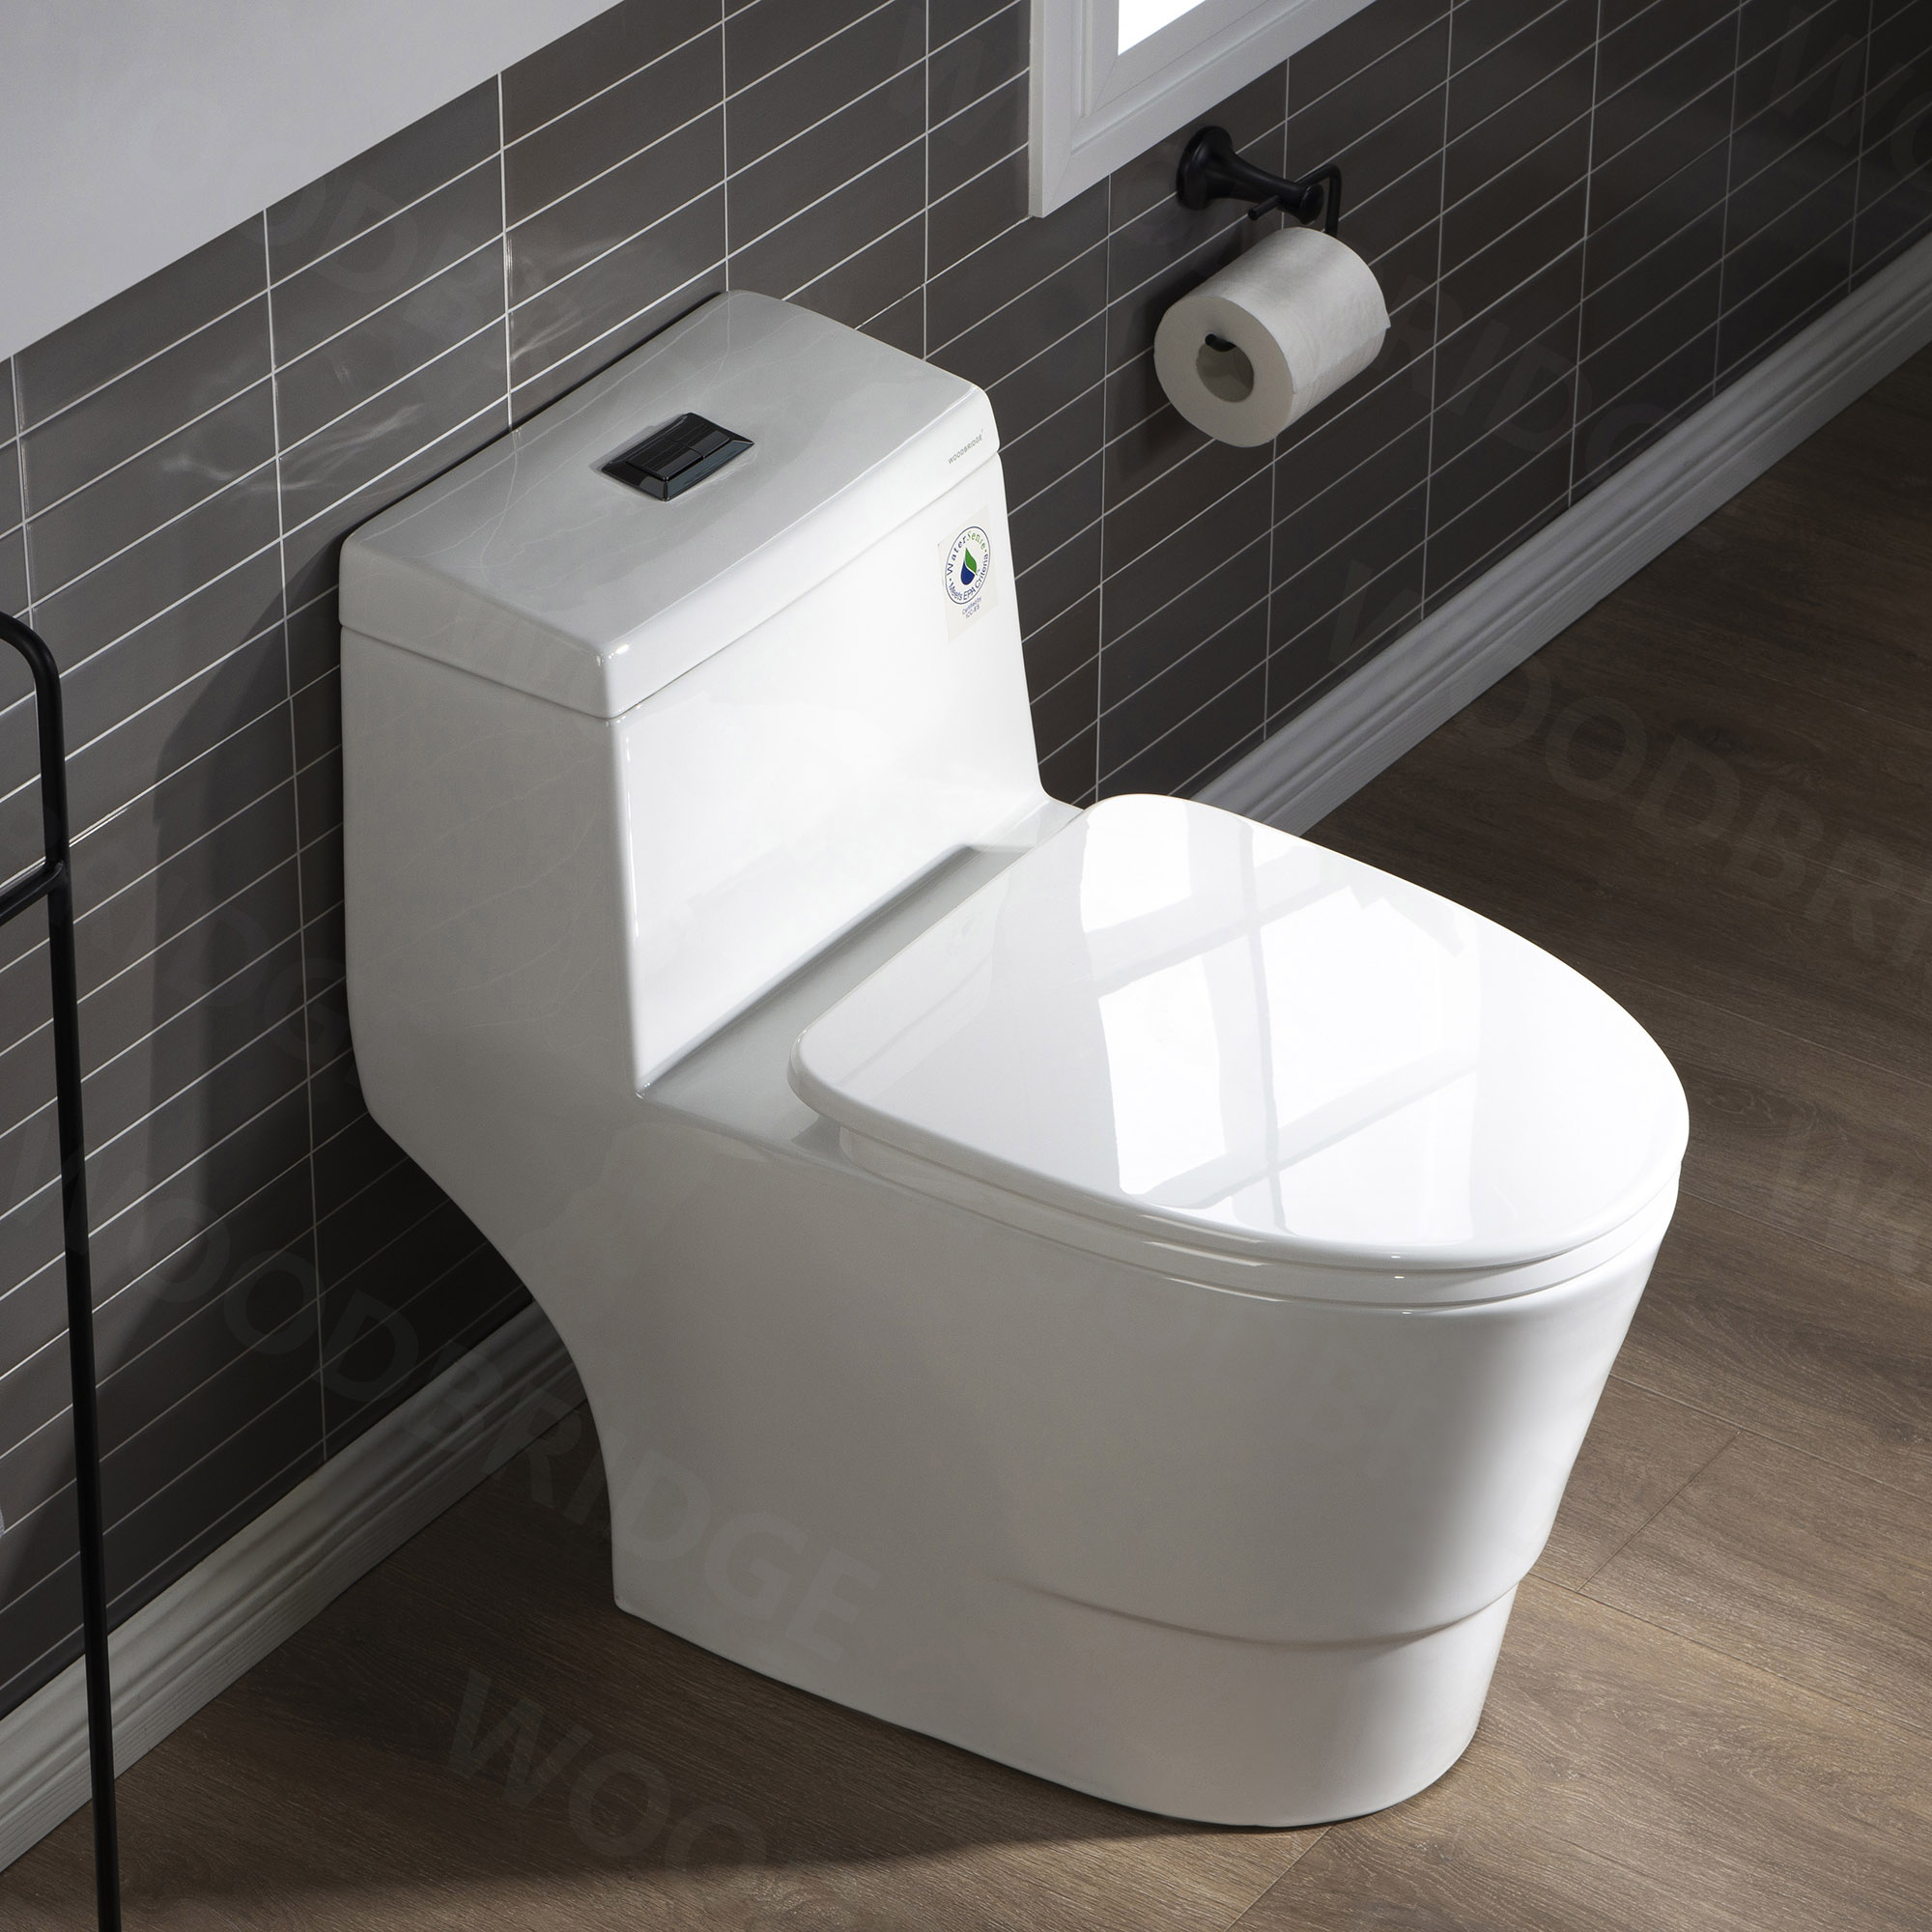  WOODBRIDGE One Piece, 1.28 GPF Dual, Chair Height, Water Sensed, 1000 Gram MaP Flushing Score Toilet with Matte Black Button T0001-MB, White (2 -Pack)_11861